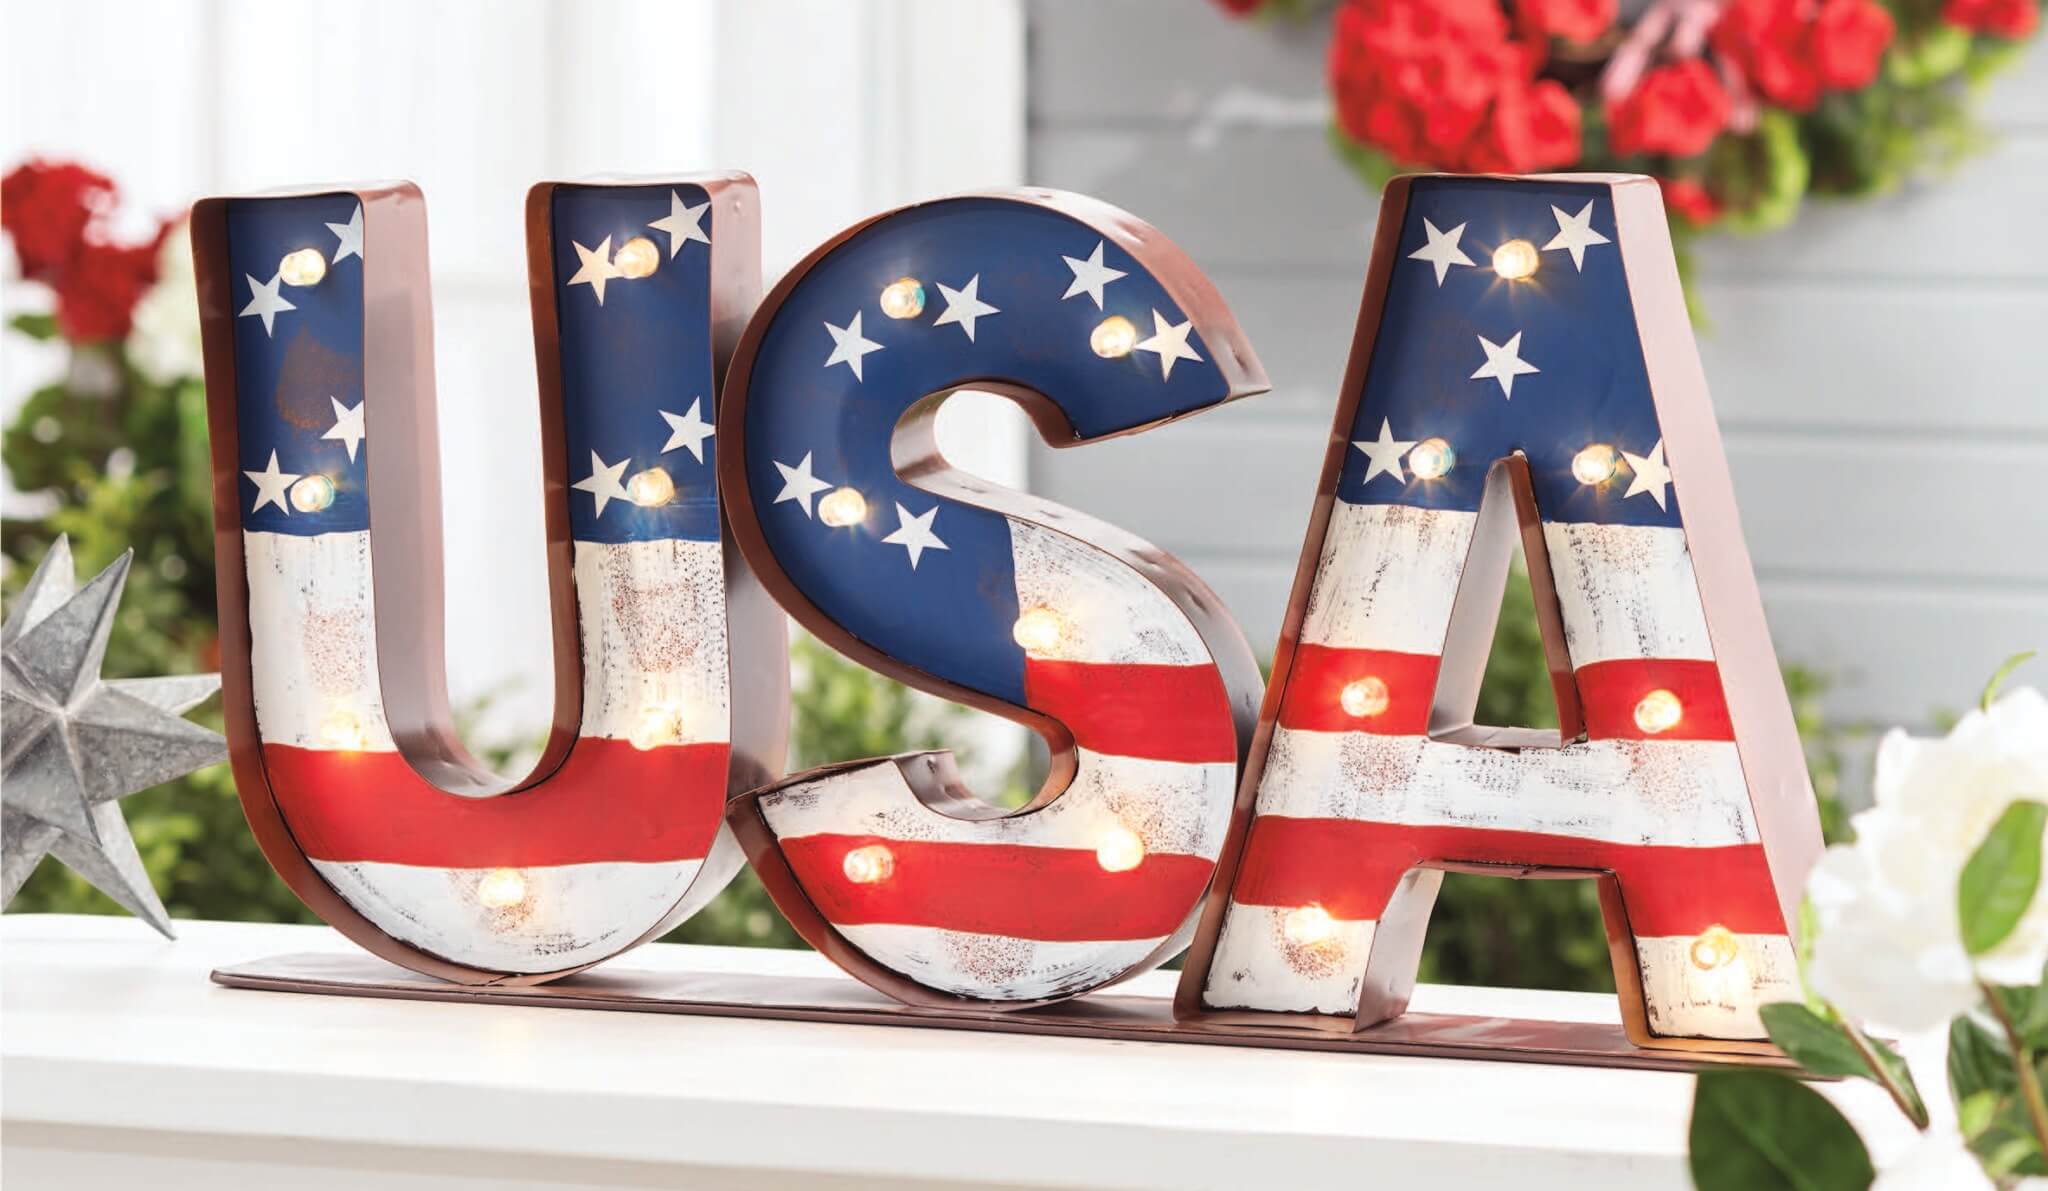 A lit USA marquee light with patriotic red and white stripes and white stars on a blue background.